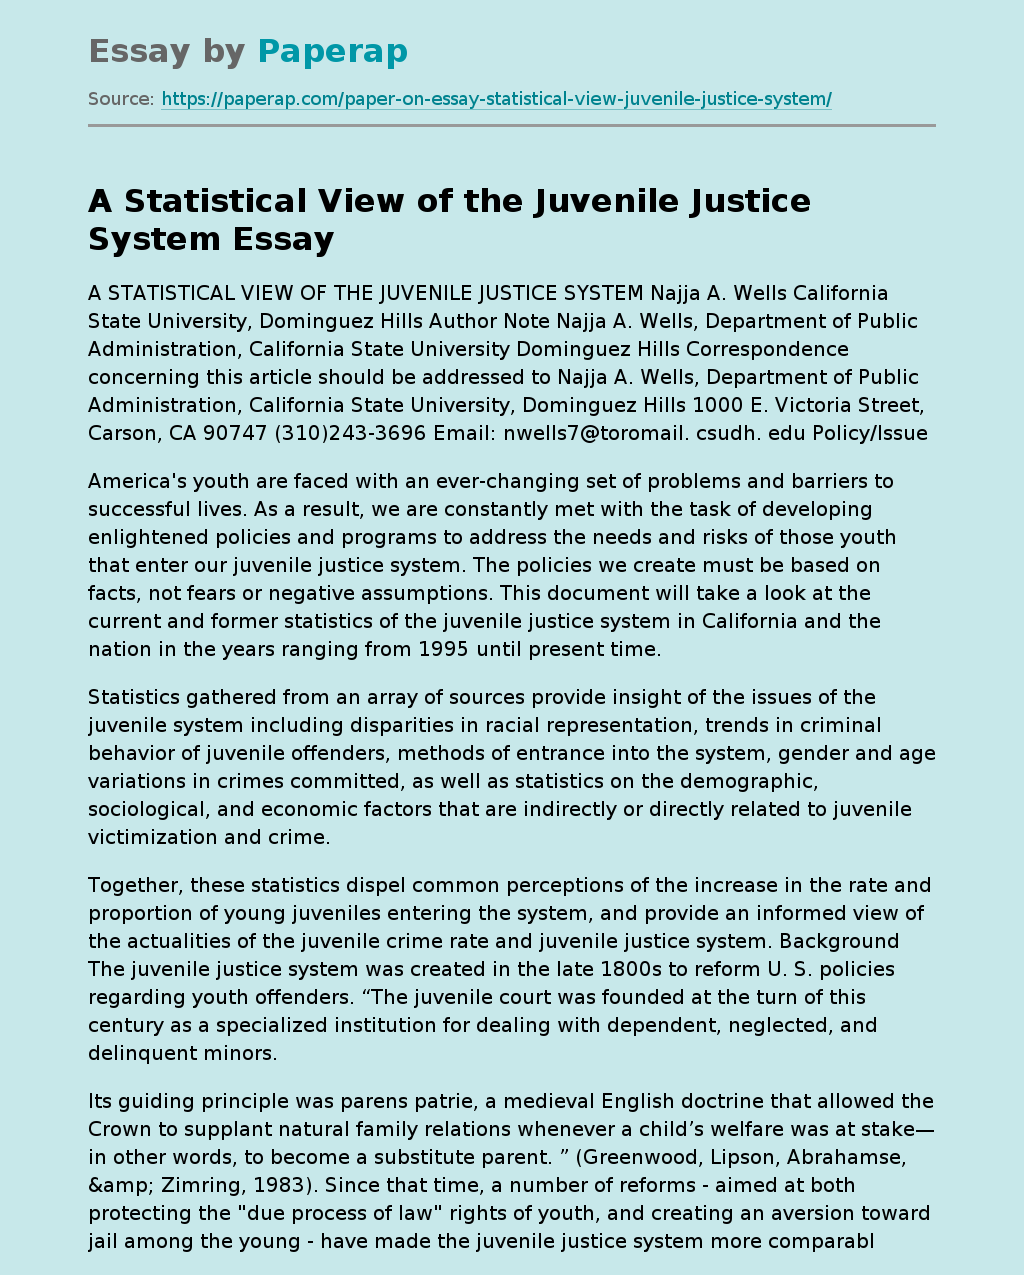 A Statistical View of the Juvenile Justice System